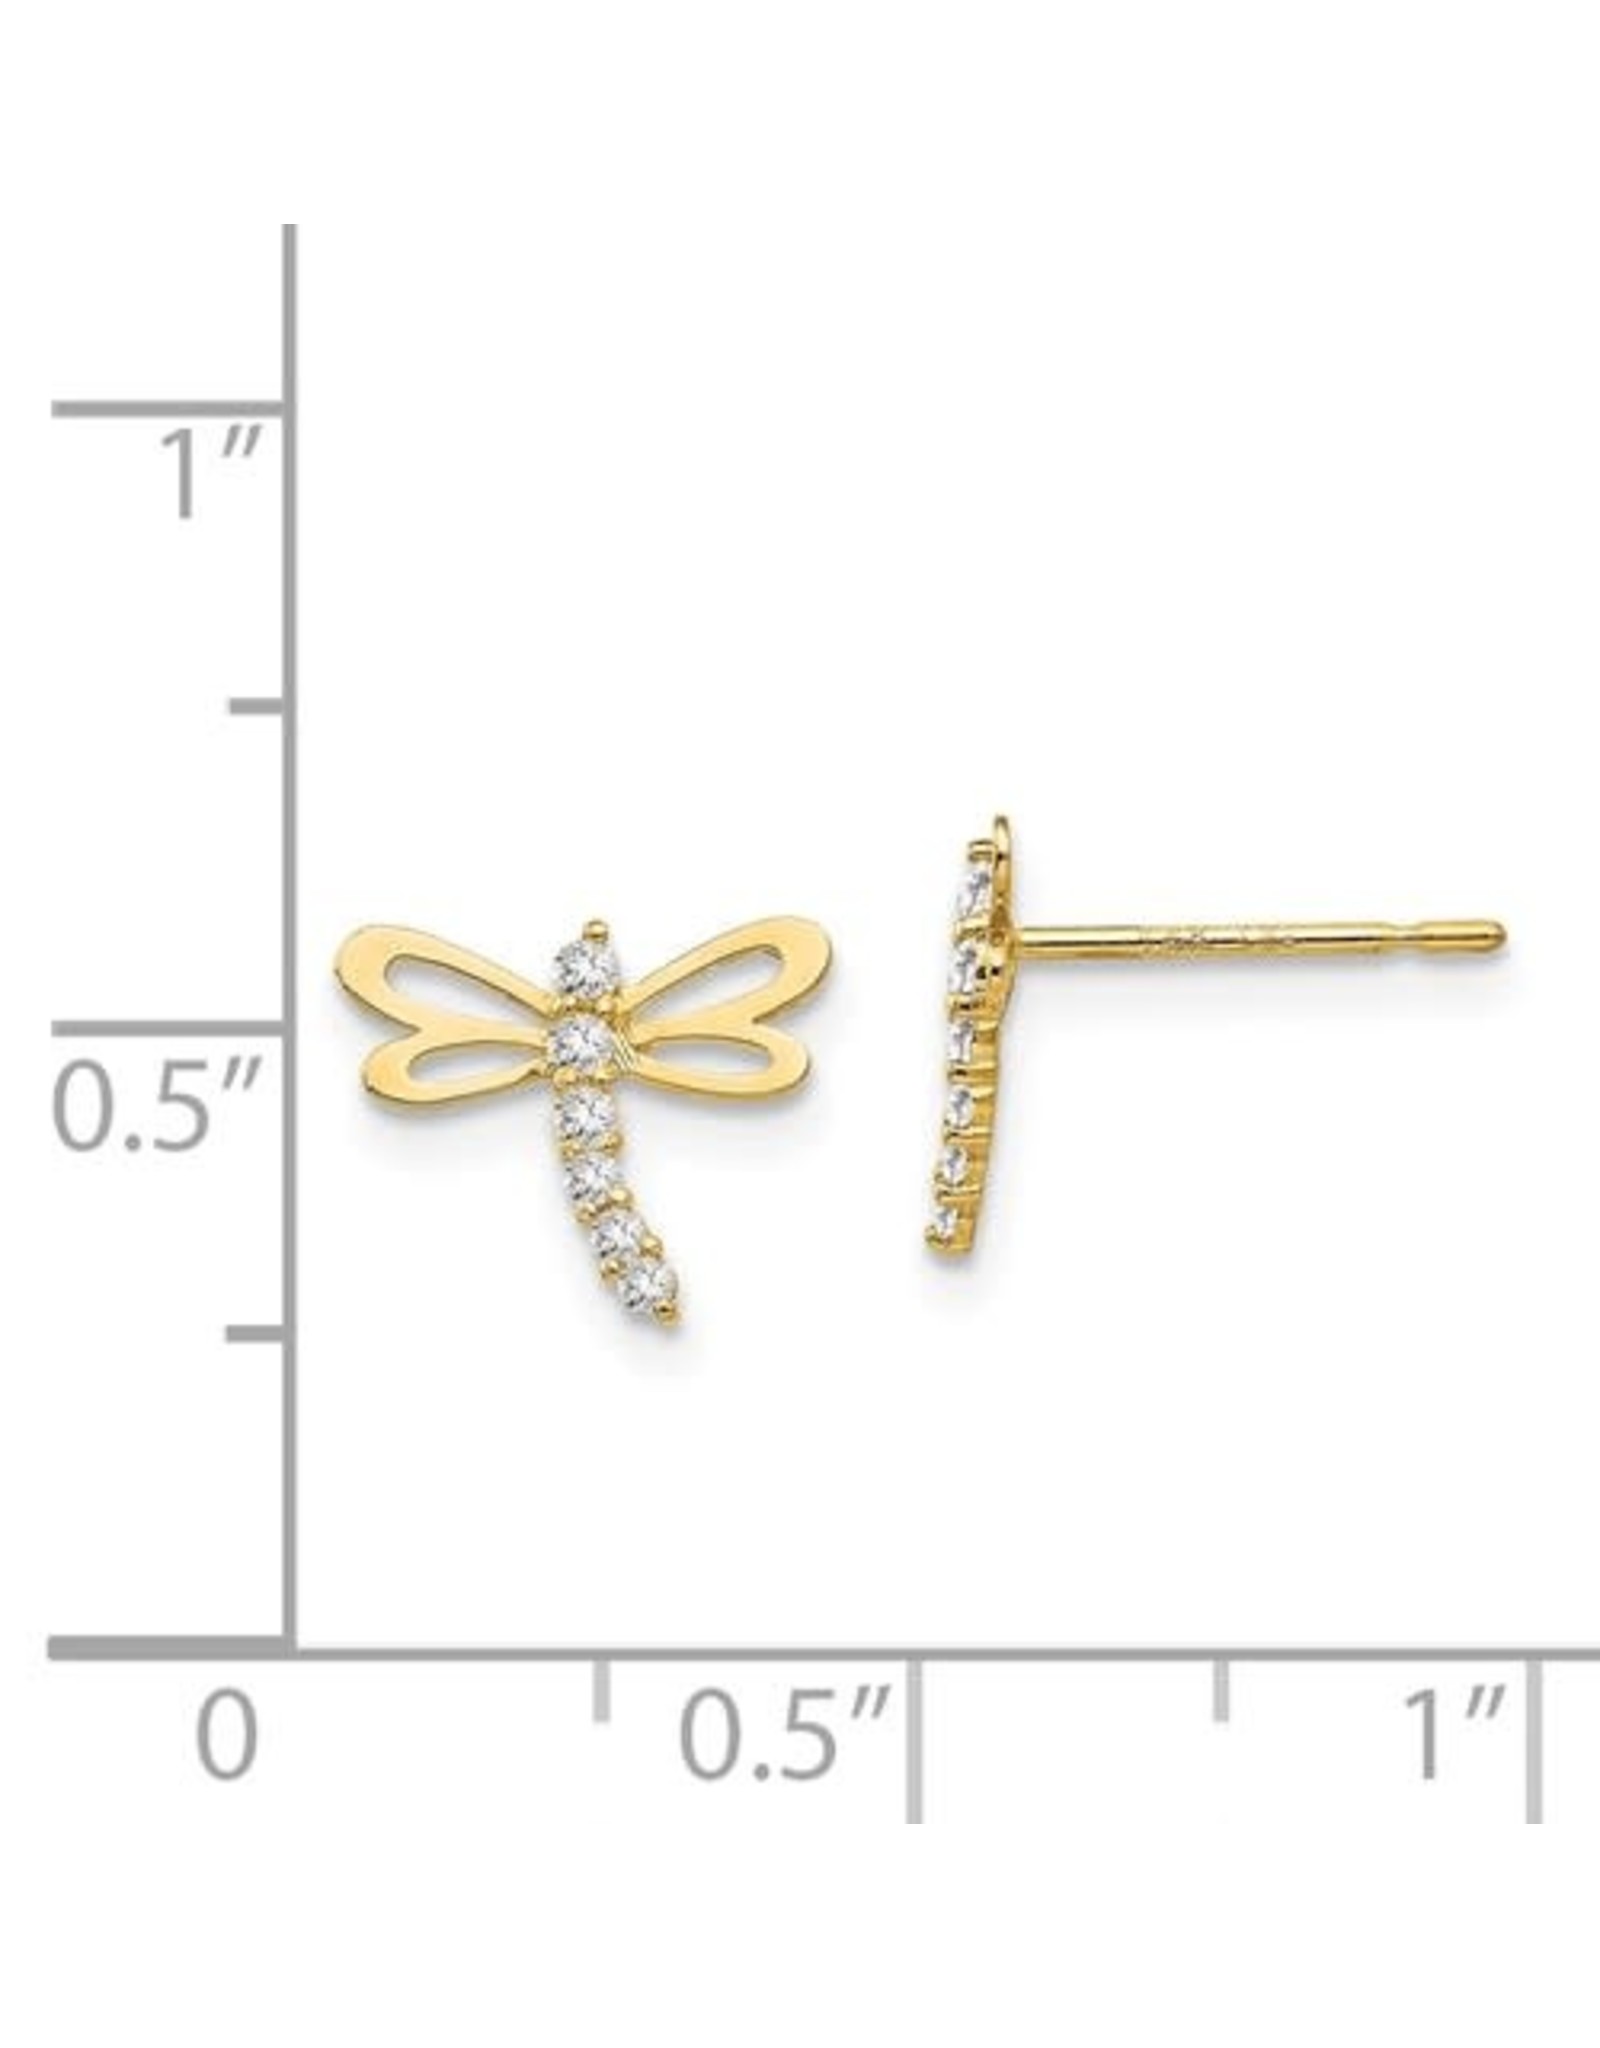 14K Yellow Gold Dragonfly Earrings with Sparkling Zirconias